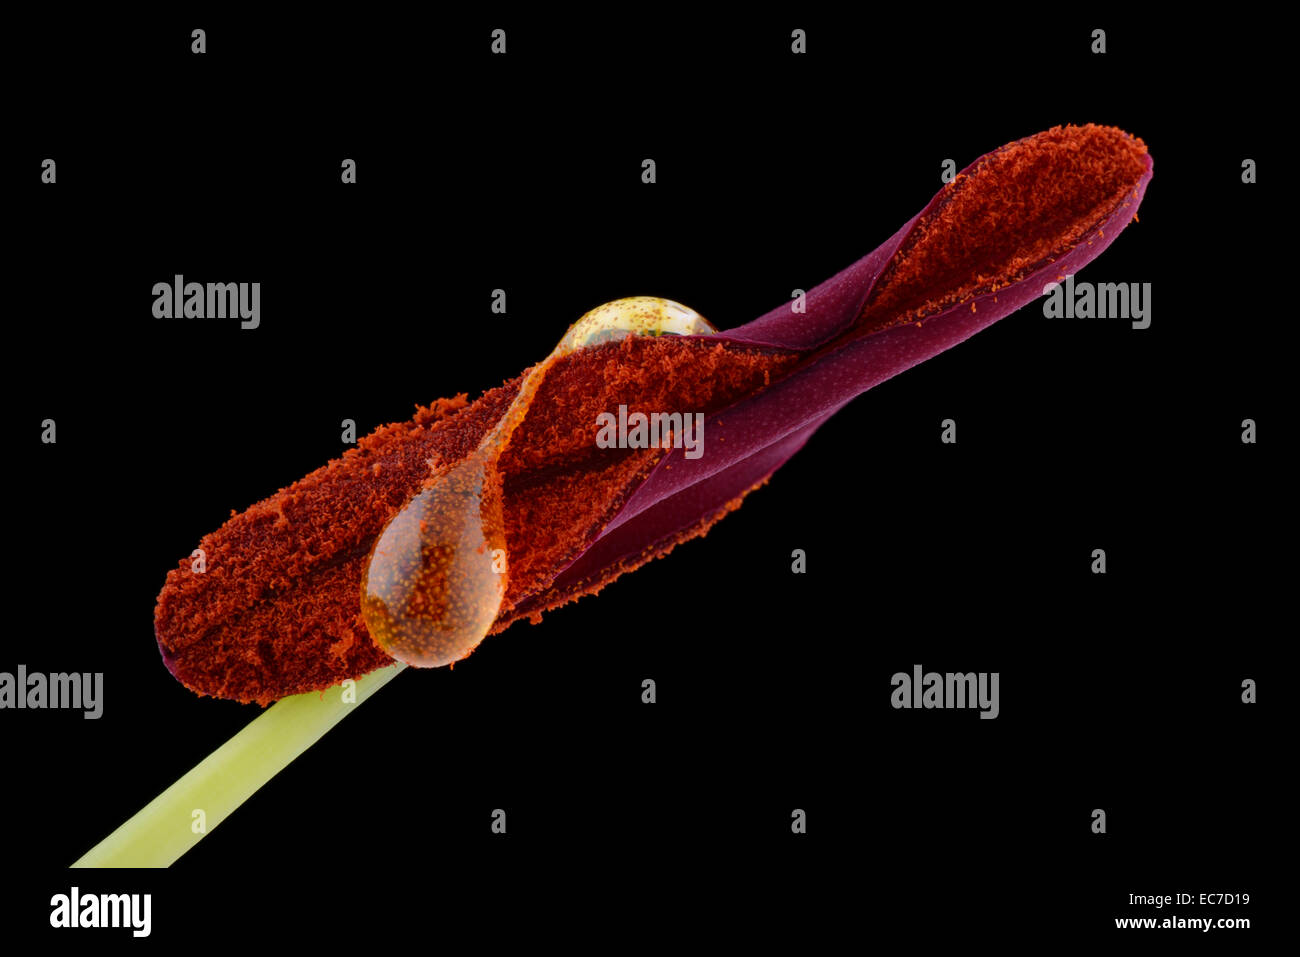 Lily anther and pollen with drops in front of black background Stock Photo